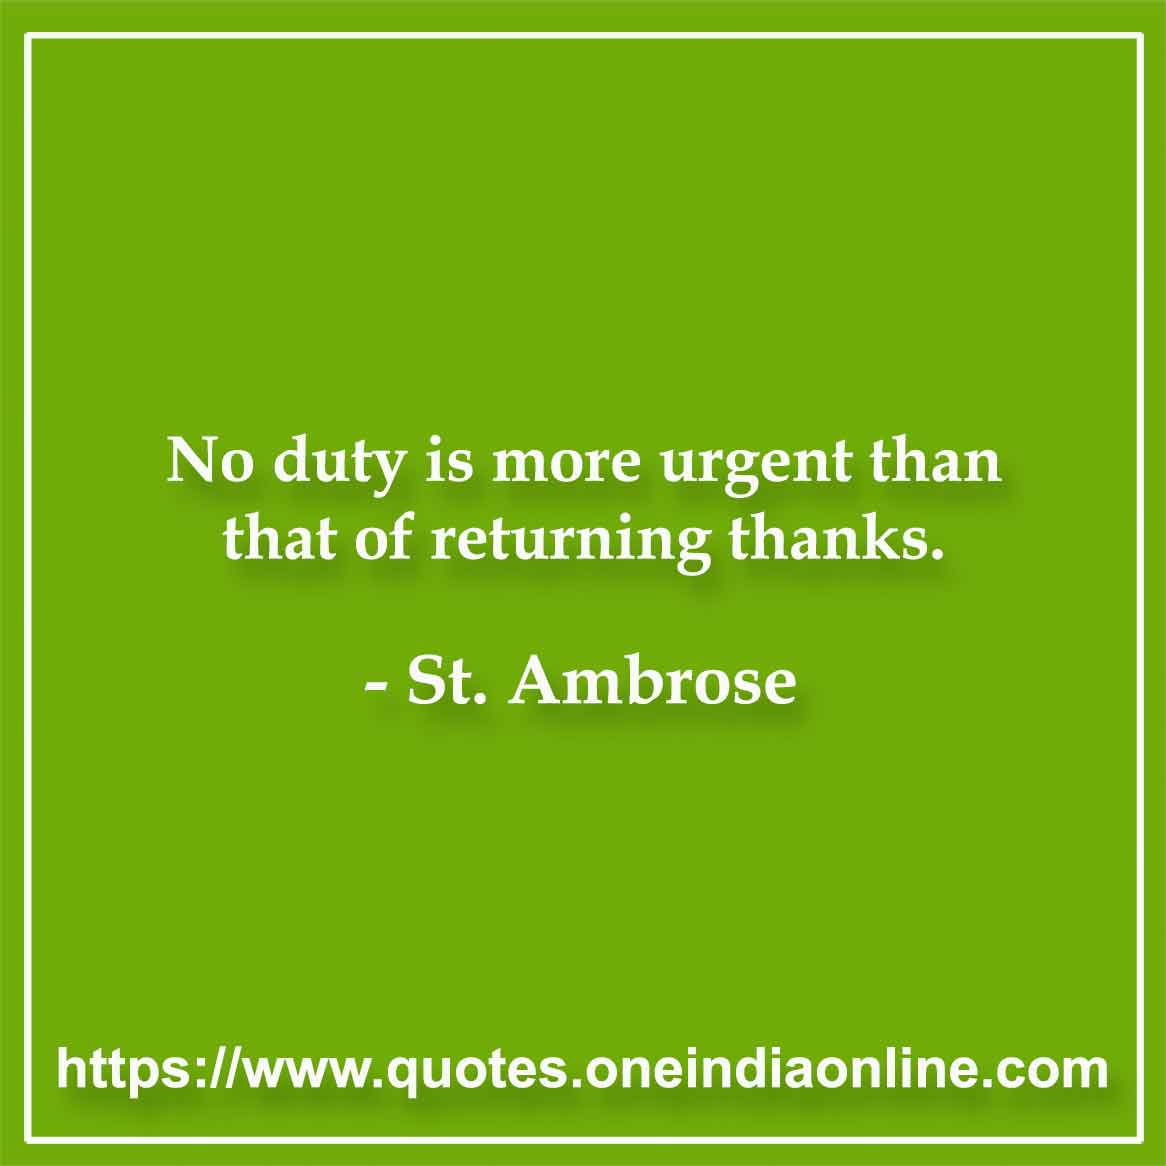 No duty is more urgent than that of returning thanks.

- St. Ambrose Quotes